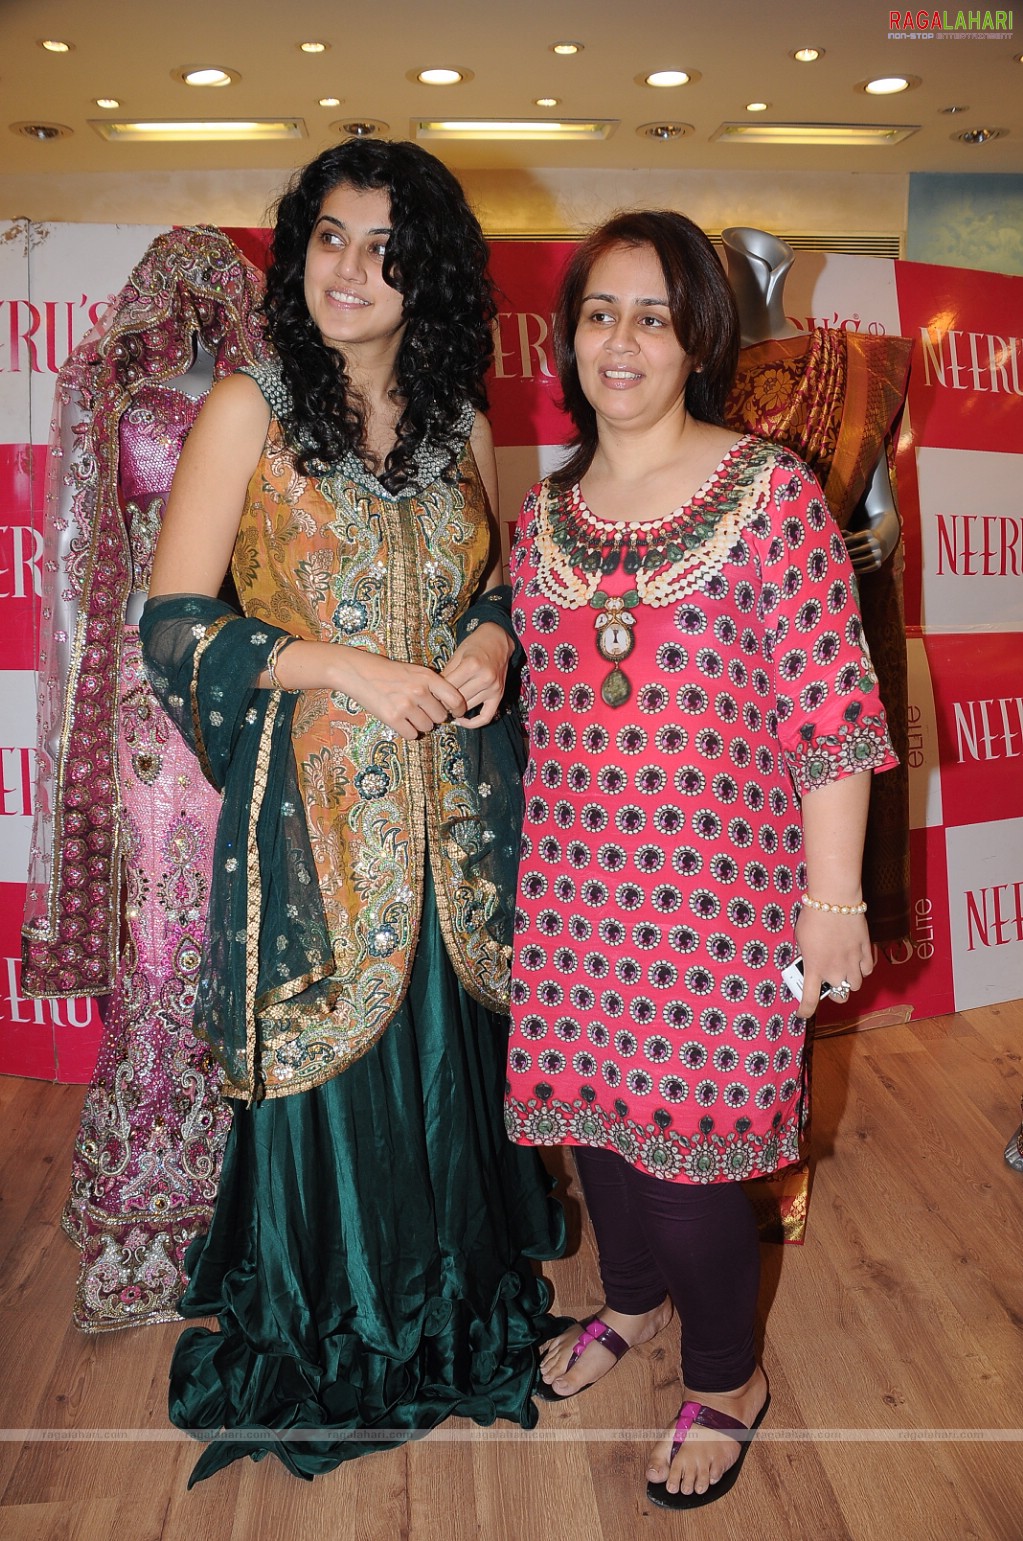 New Bridal Collection Launch at Neeru's by Taapsee